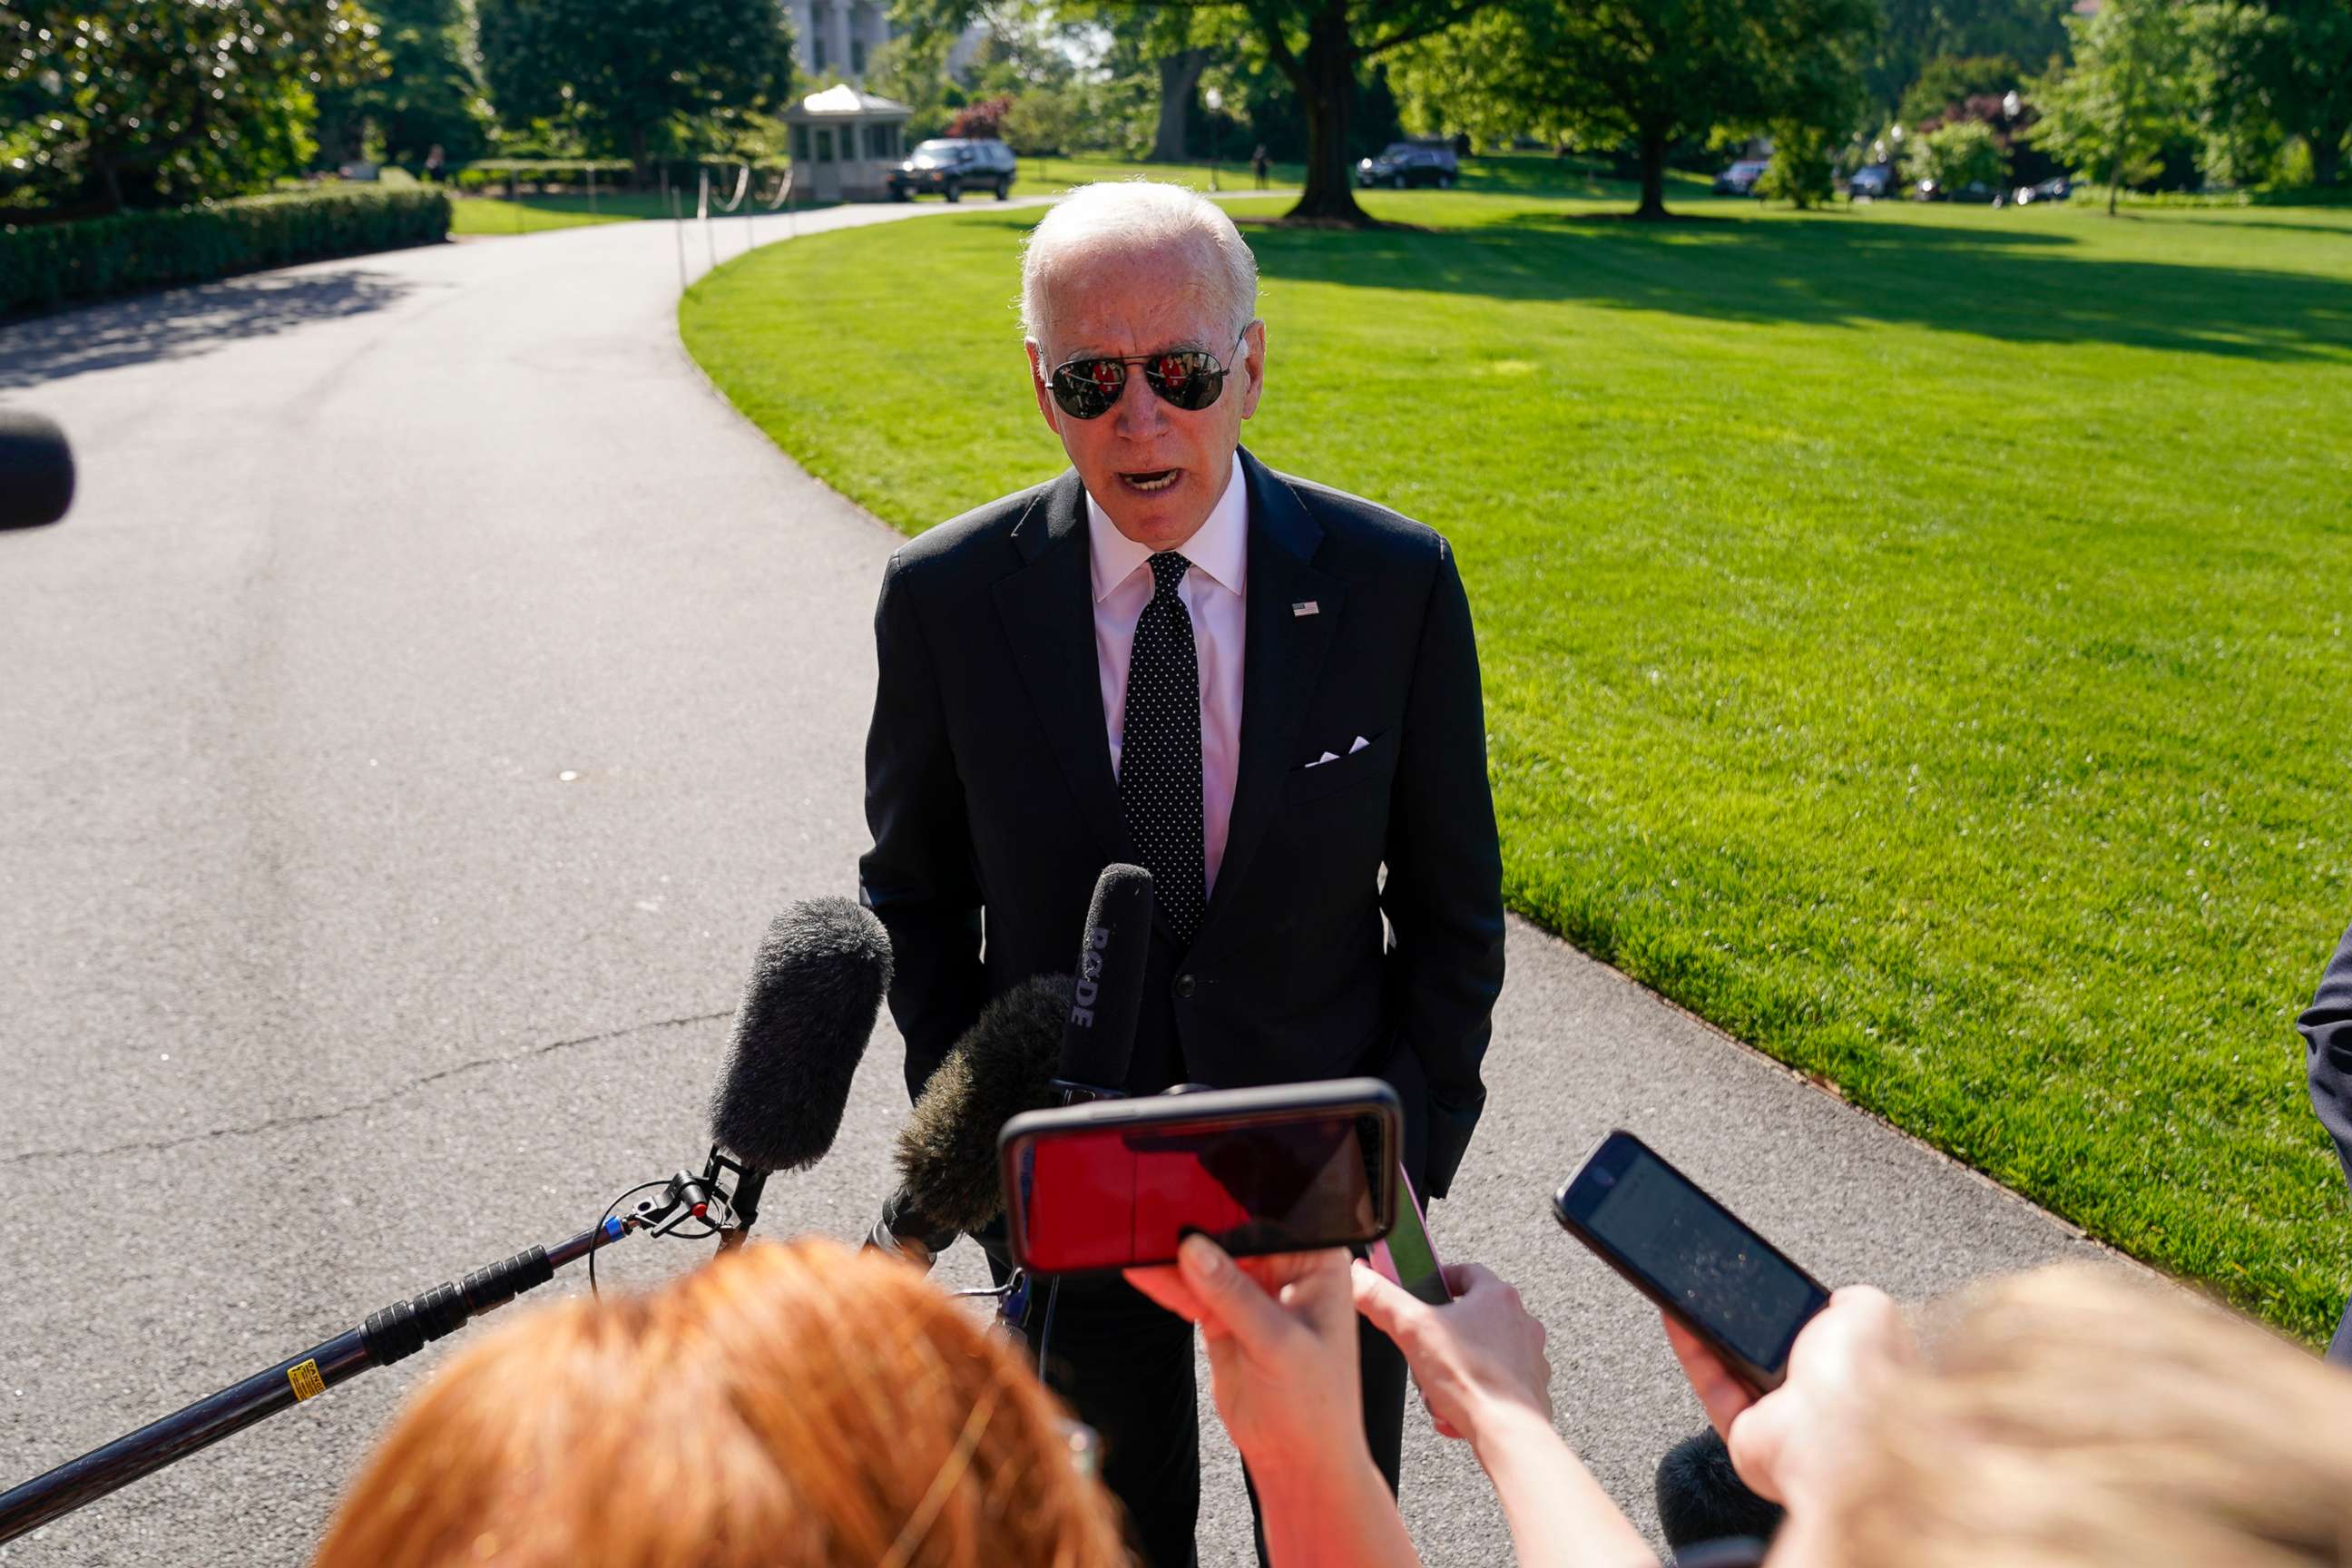 PHOTO: President Joe Biden speaks to reporters as he returns to the White House from Delaware on the South Lawn in Washington, D.C., May 30, 2022.